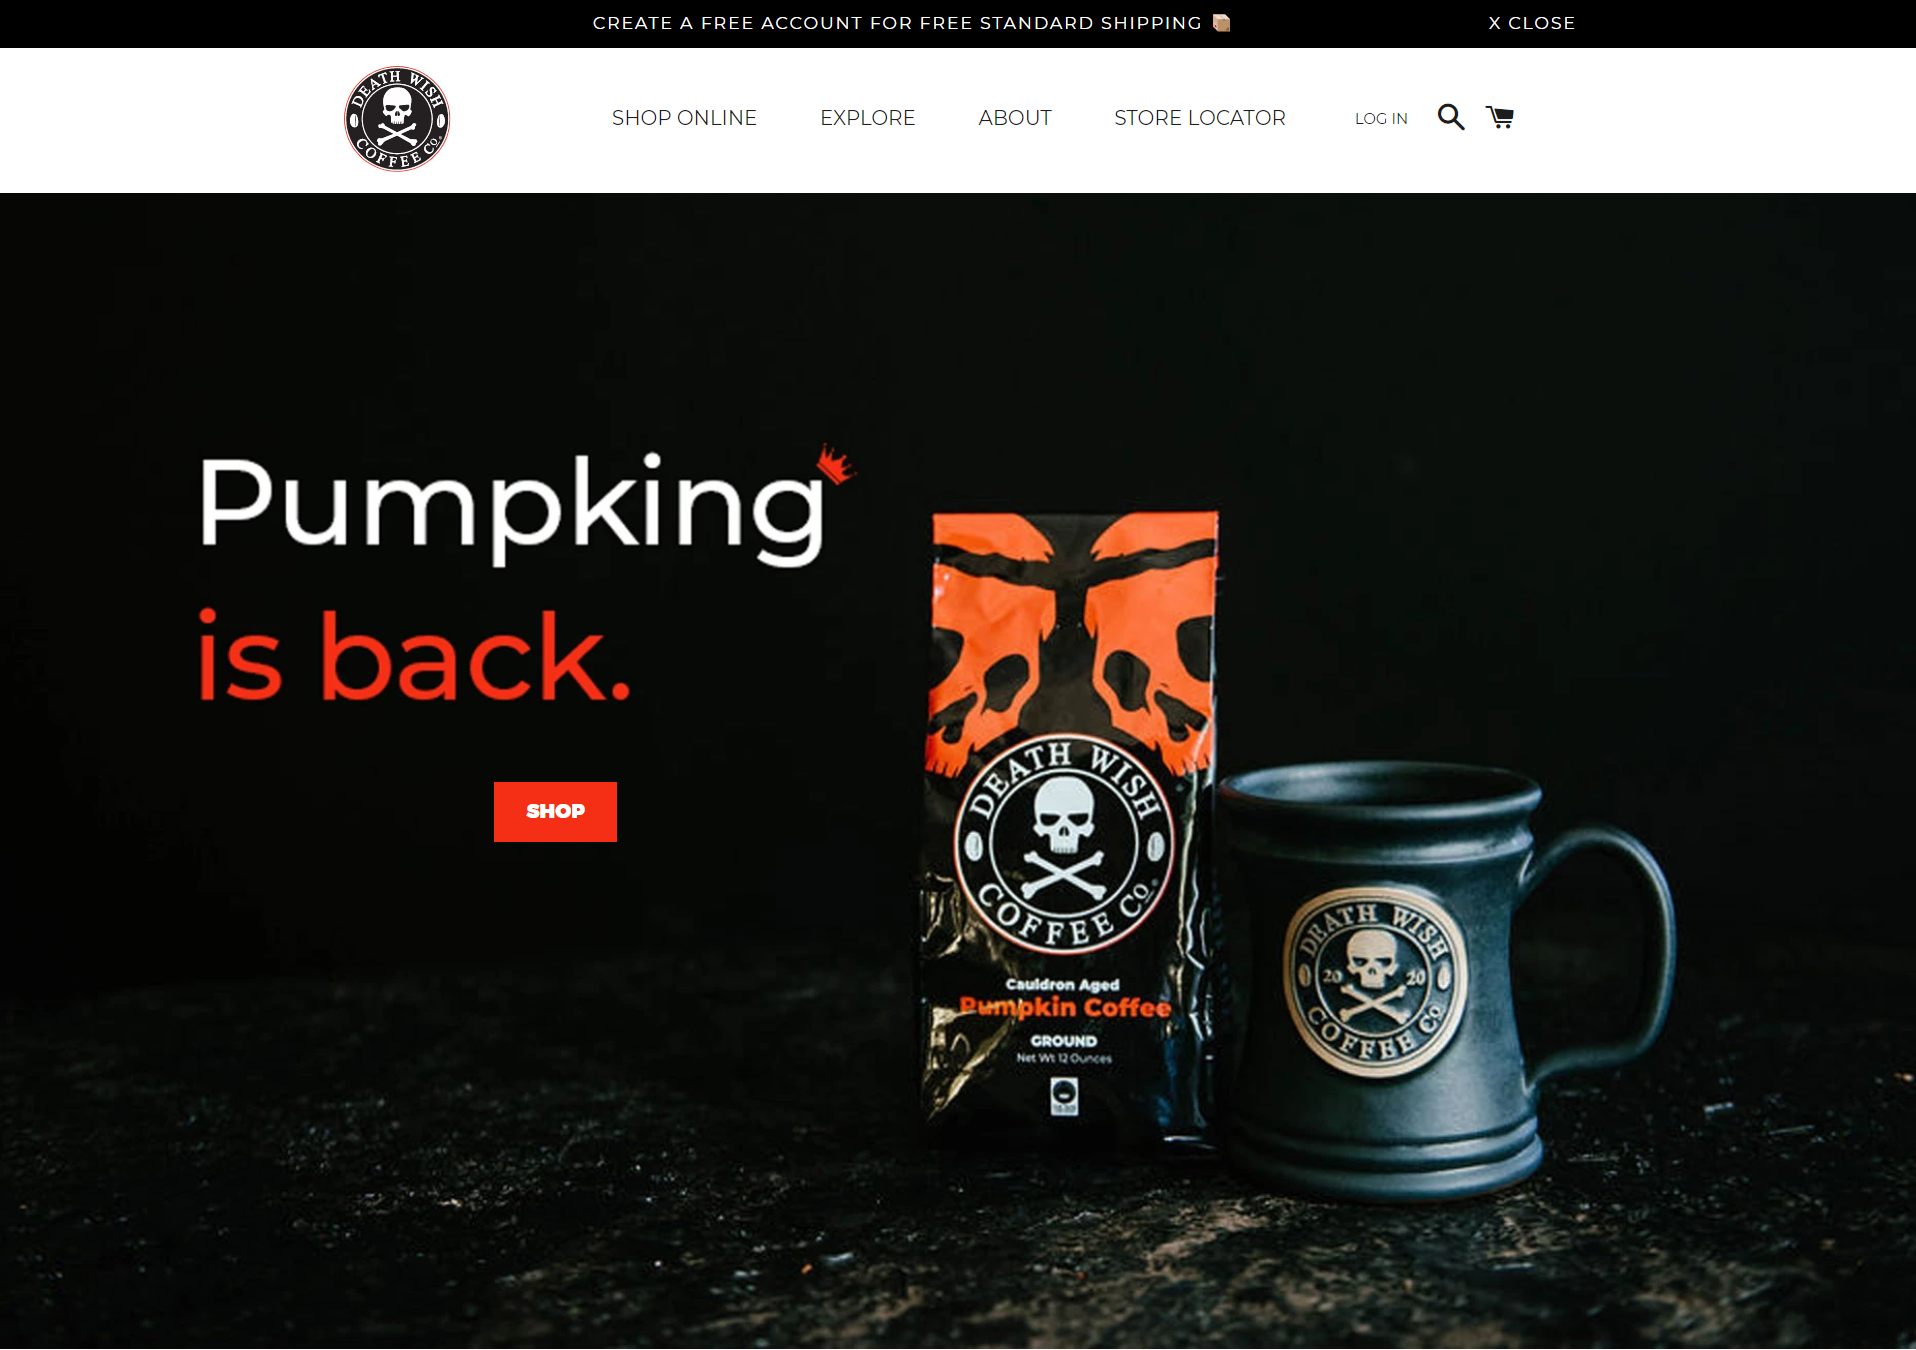 Death Wish Coffee online store shopify